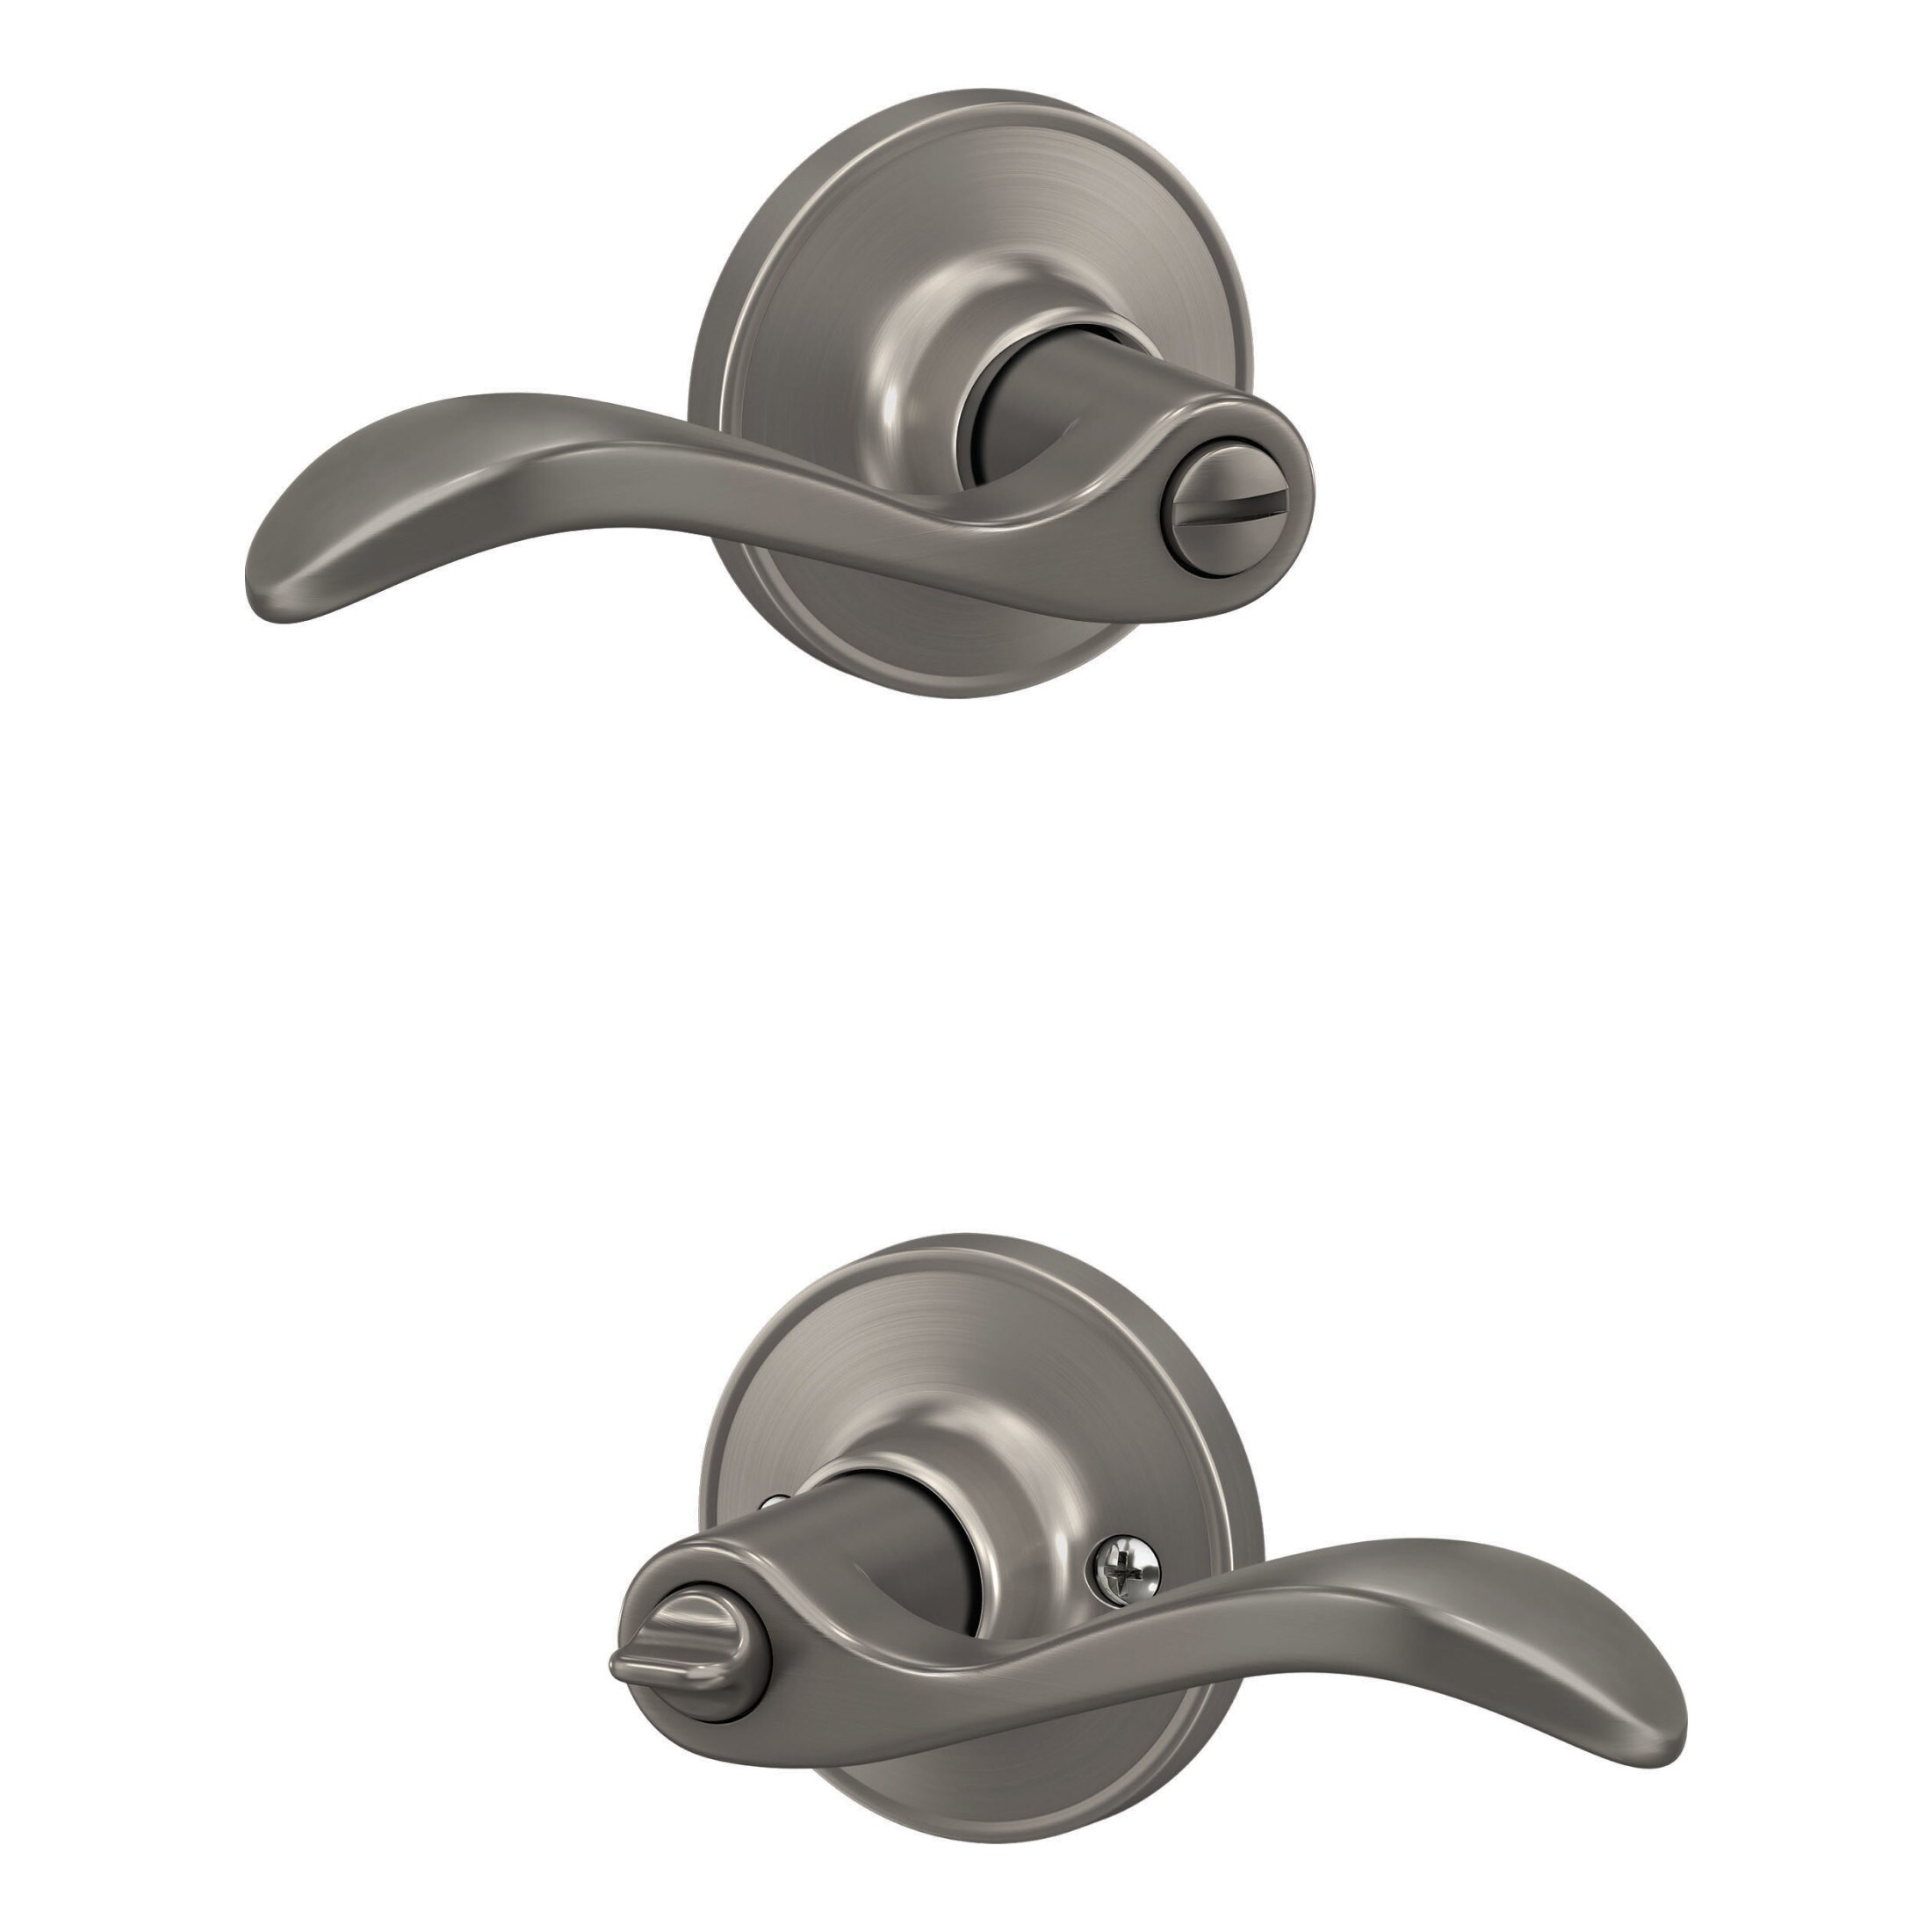 Dexter by Schlage Seville Lever Bed and Bath Lock in the Door 